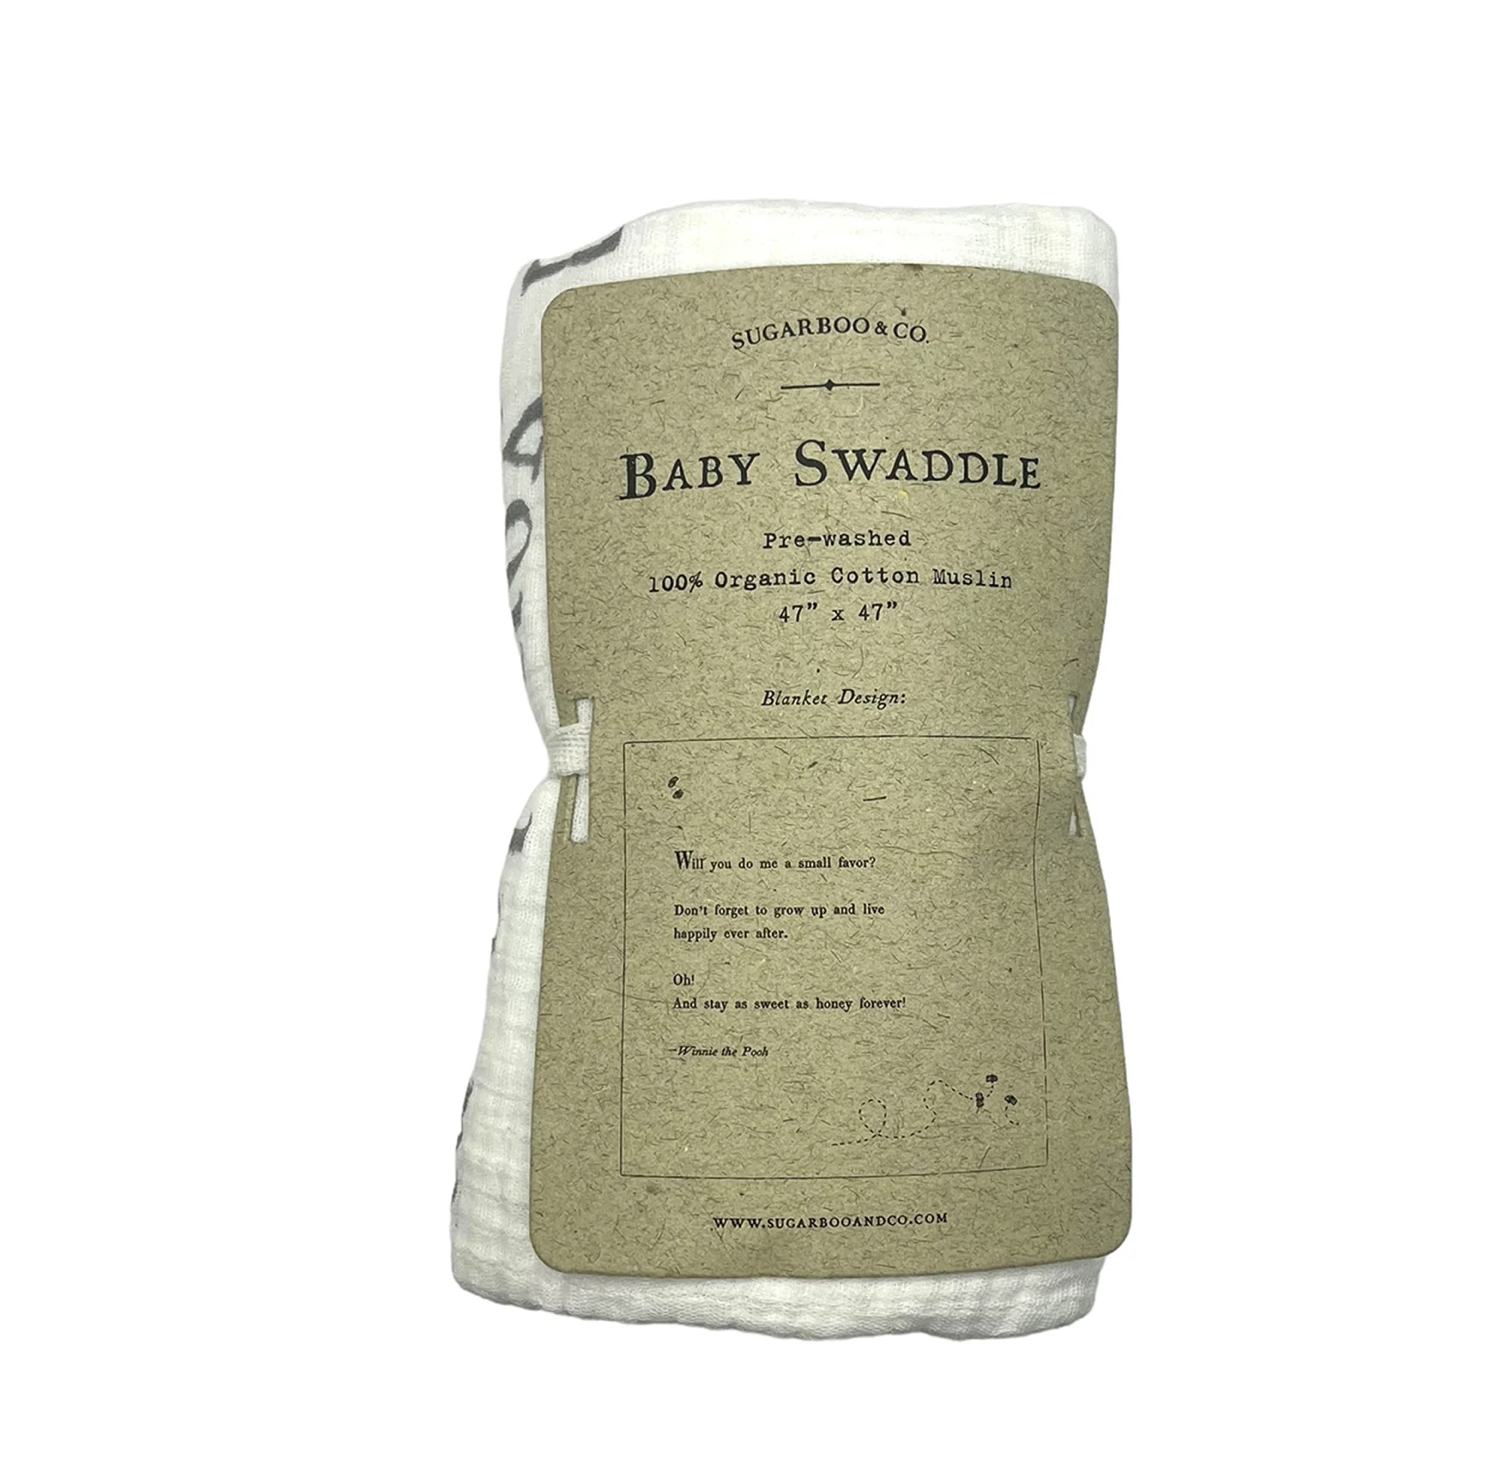 Sugarboo & Co Baby Swaddle